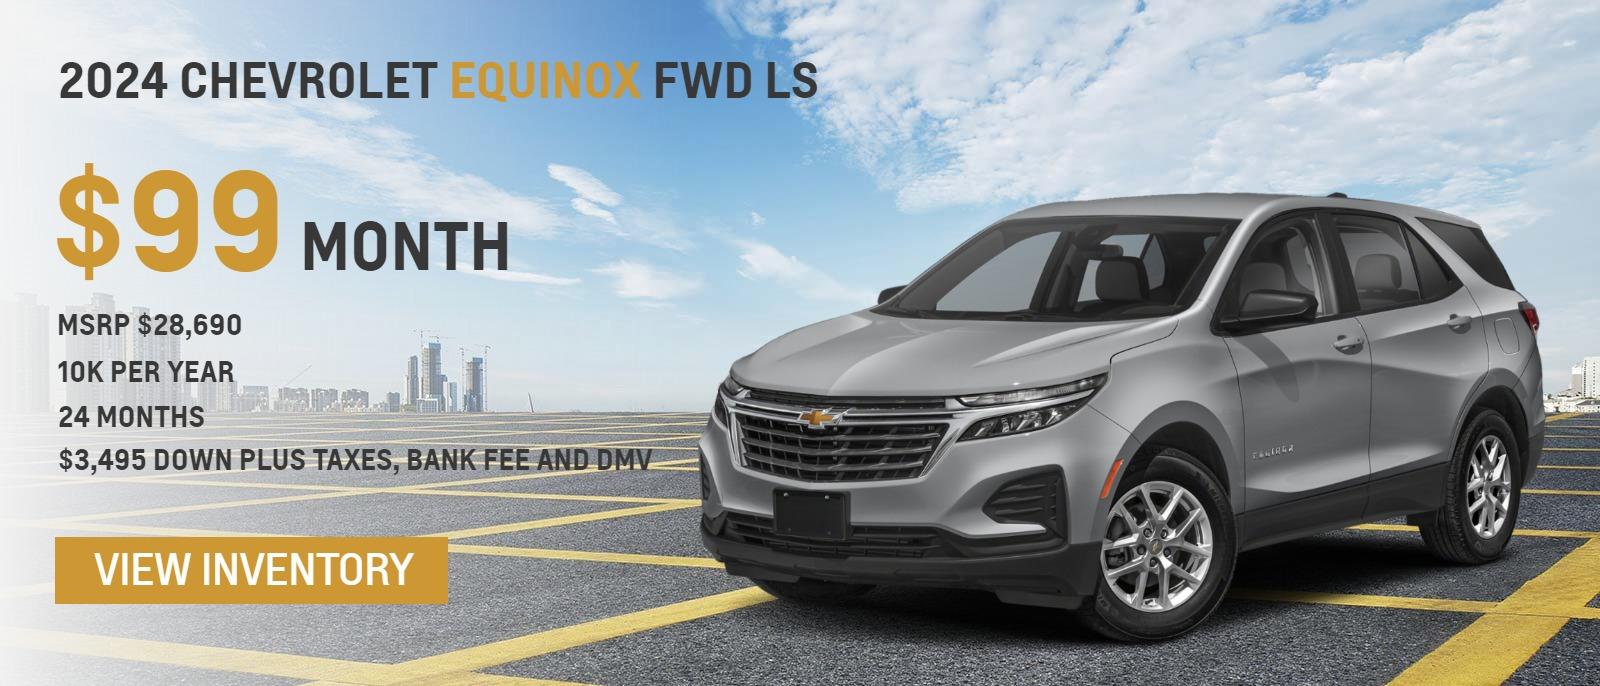 2024 Chevrolet Equinox FWD LS
MSRP $28,690.
10k per year
24 months
$99. month
$3,495 down plus taxes, bank fee and DMV